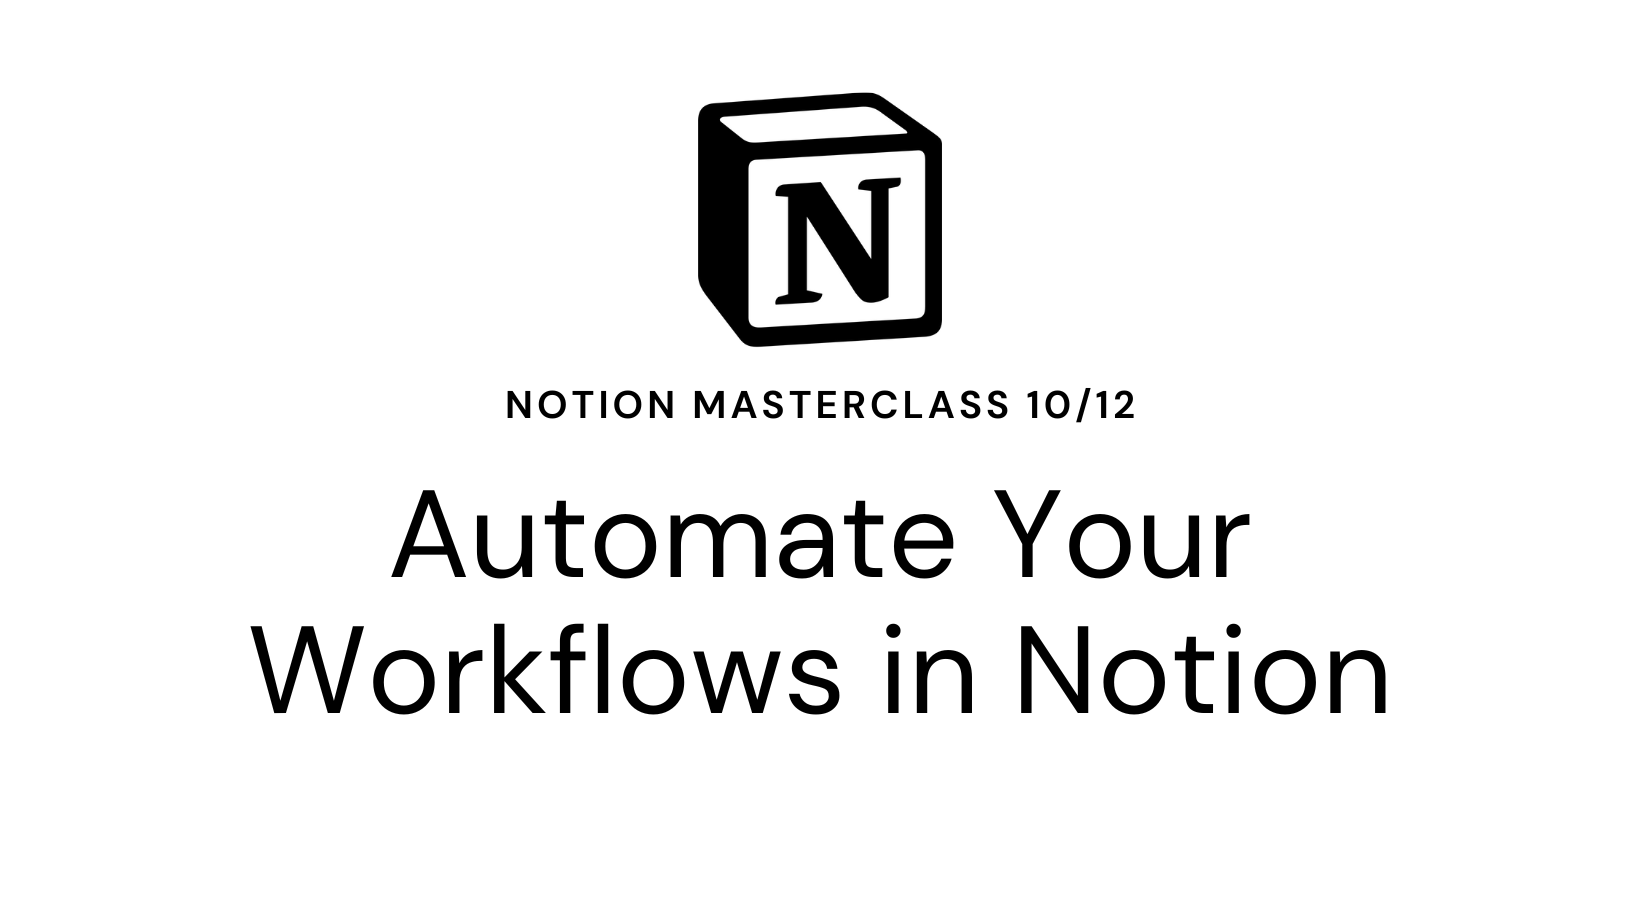 How to Automate Your Workflows in Notion: A Step-by-Step Guide to Creating Powerful Workflows